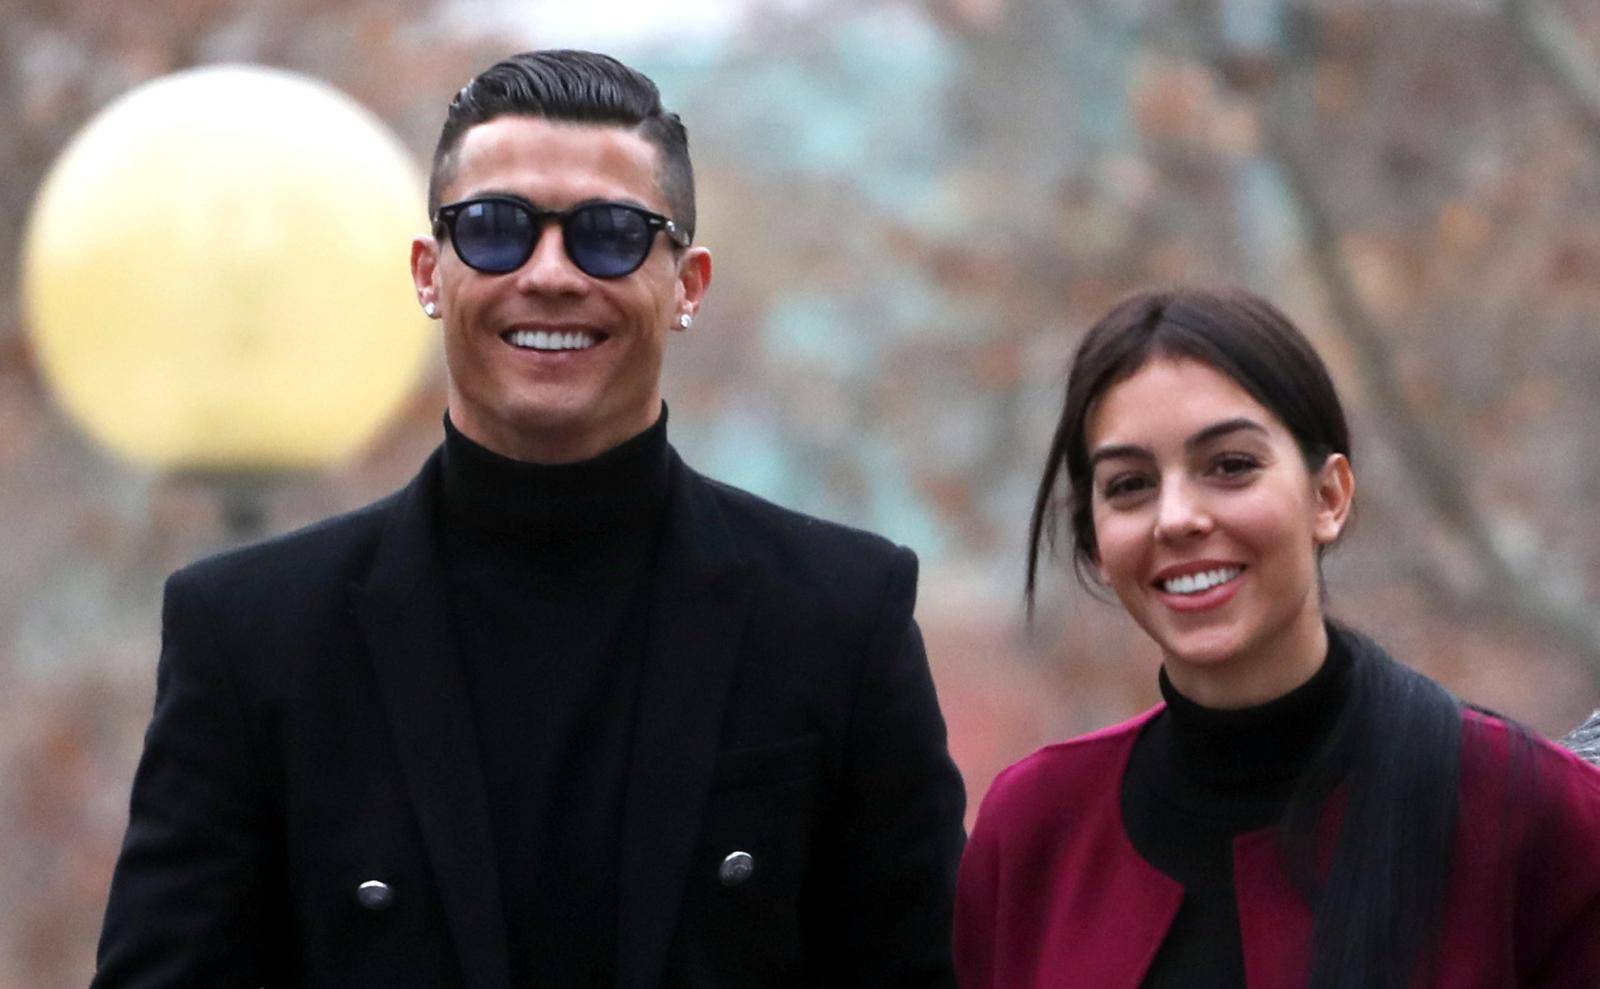 Portugal's soccer player Cristiano Ronaldo arrives to appear in court on a trial for tax fraud in Madrid